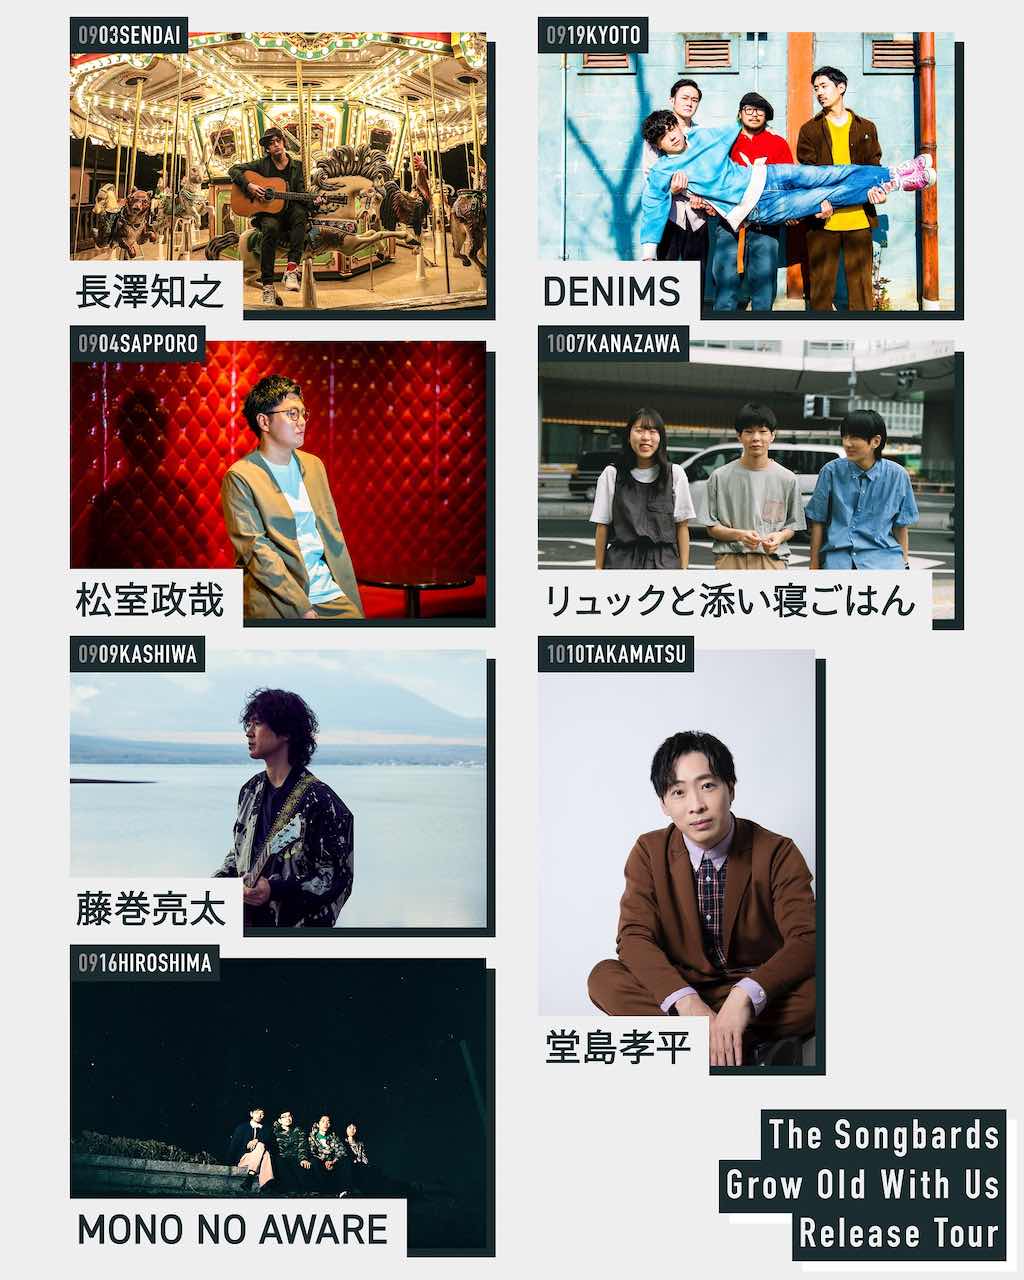 The Songbards、全国ツアー豪華対バンアーティスト発表！